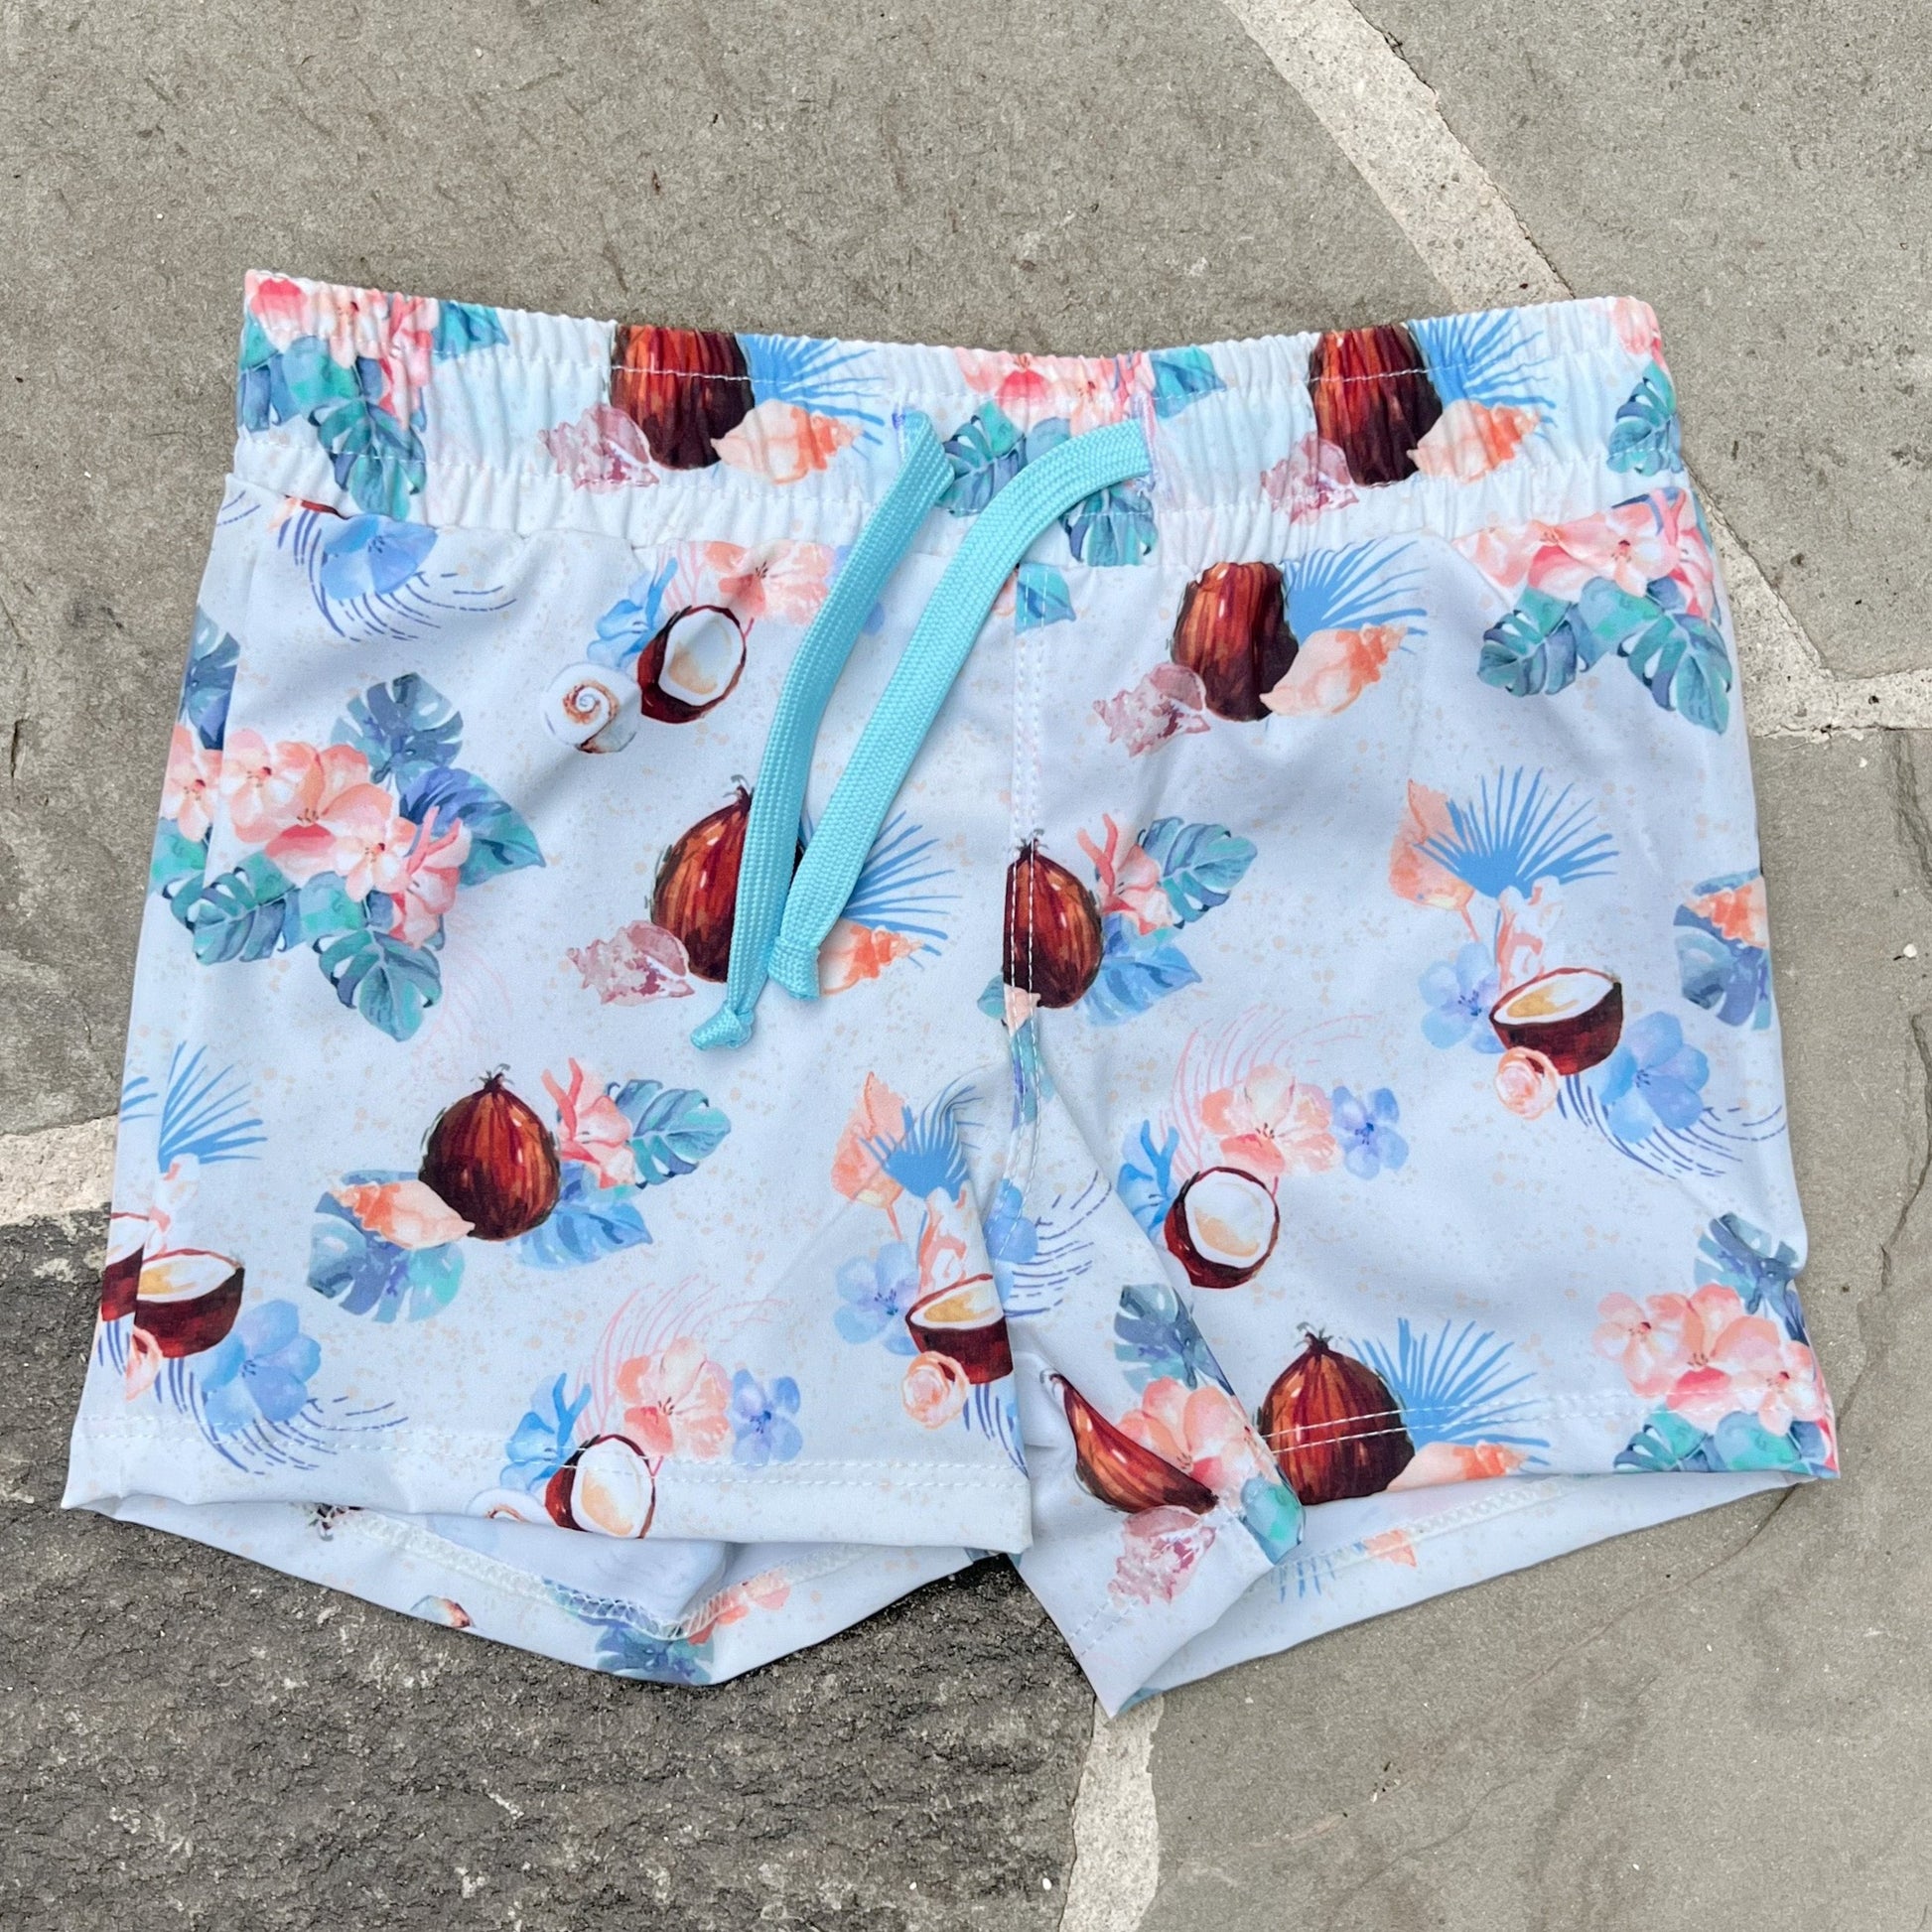 Bali Board Shorts - made from recycled plastic right here in the USA